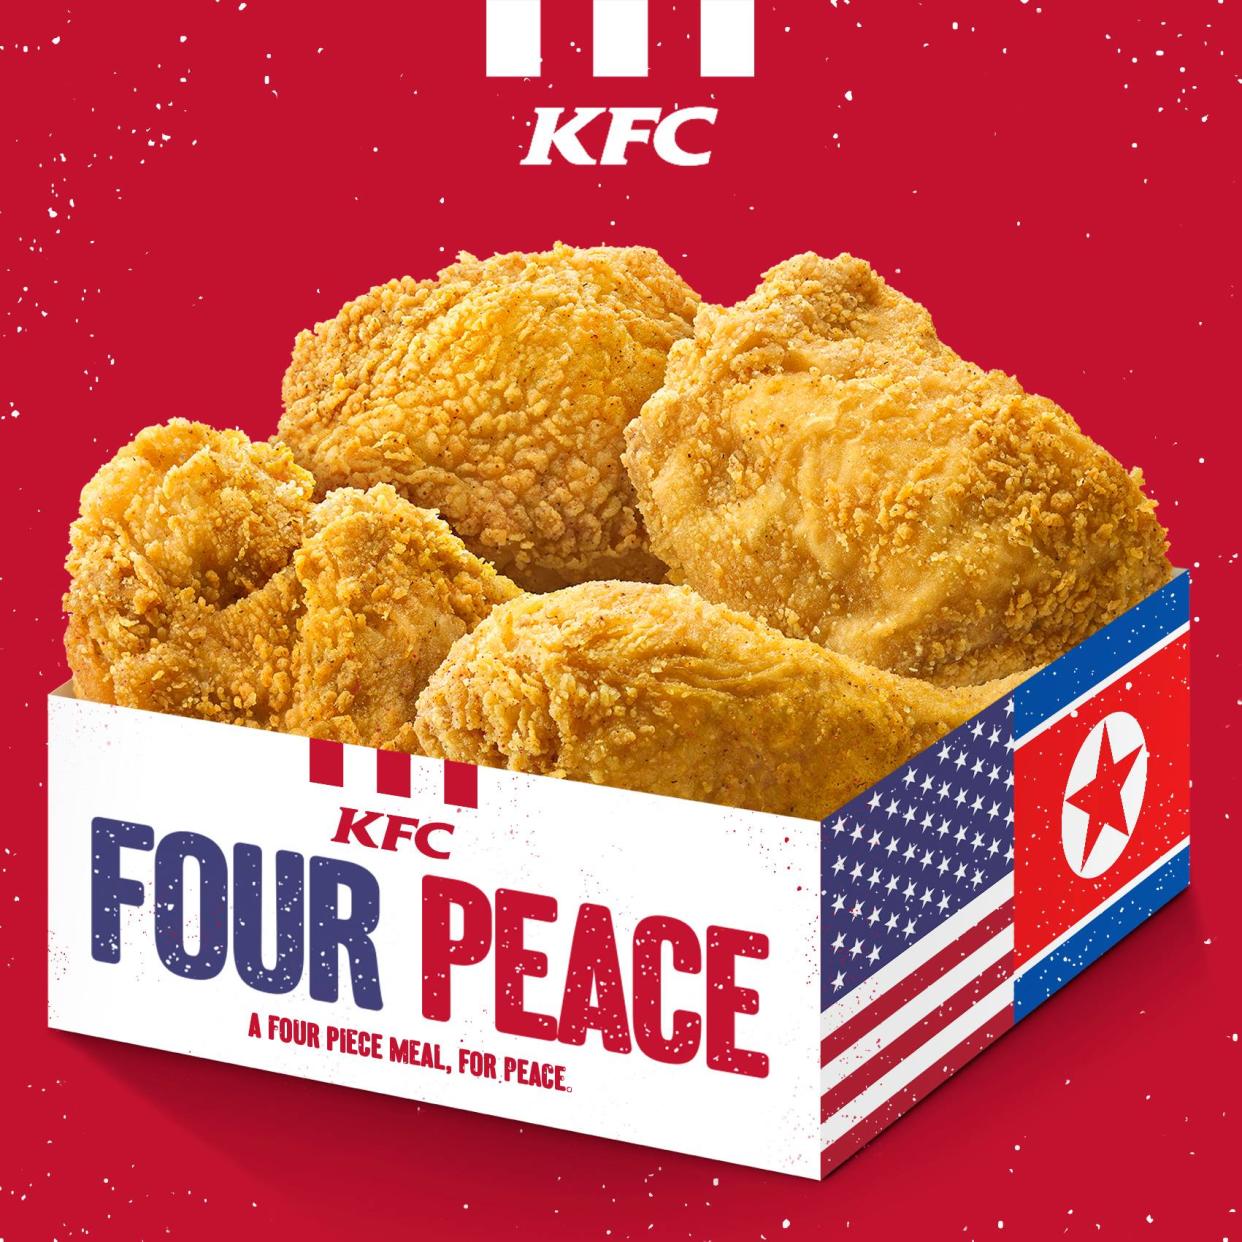 KFC’s Four Peace Meal for US President Donald Trump and North Korean leader Kim Jong Un during their summit on 12 June 2018. (PHOTO: KFC)